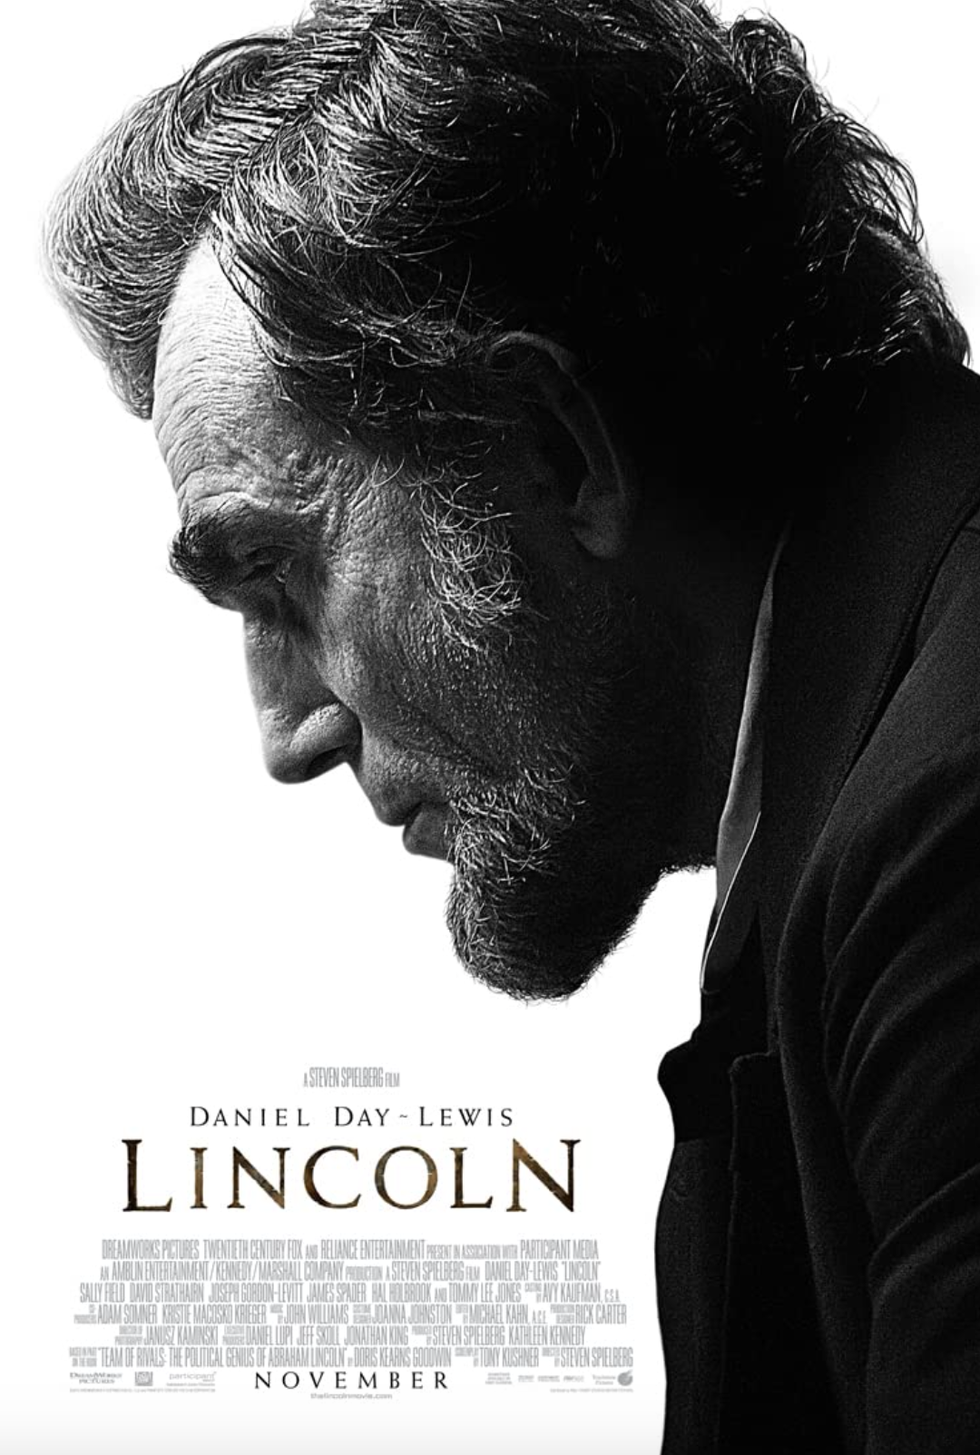 daniel day lewis as lincoln in 'lincoln'